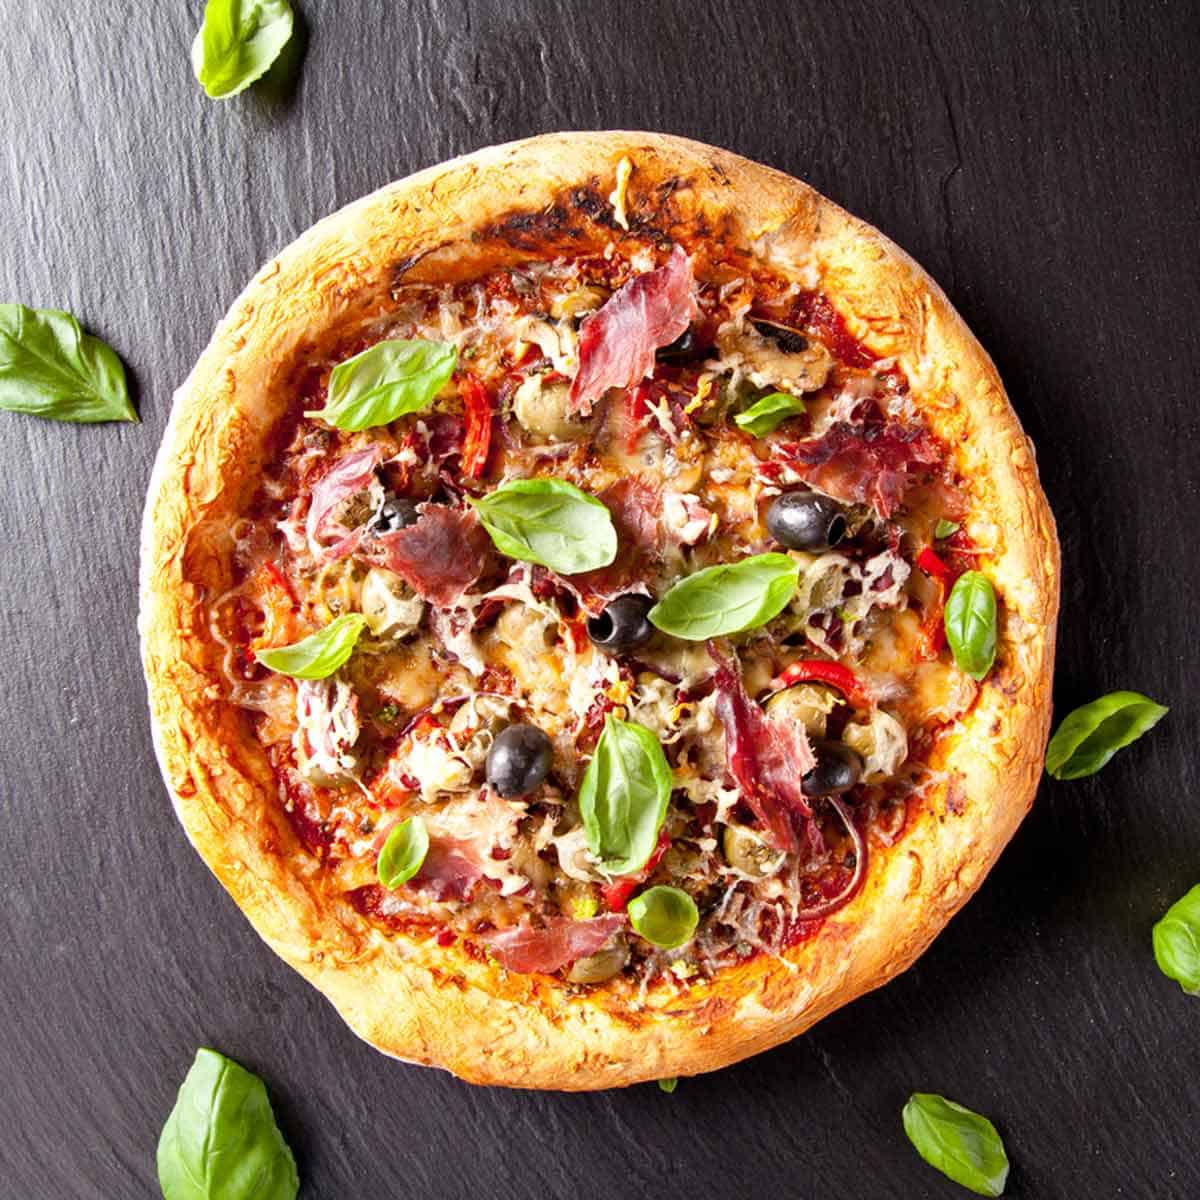 A homemade pizza topped with meats, veggies, and fresh basil leaves.